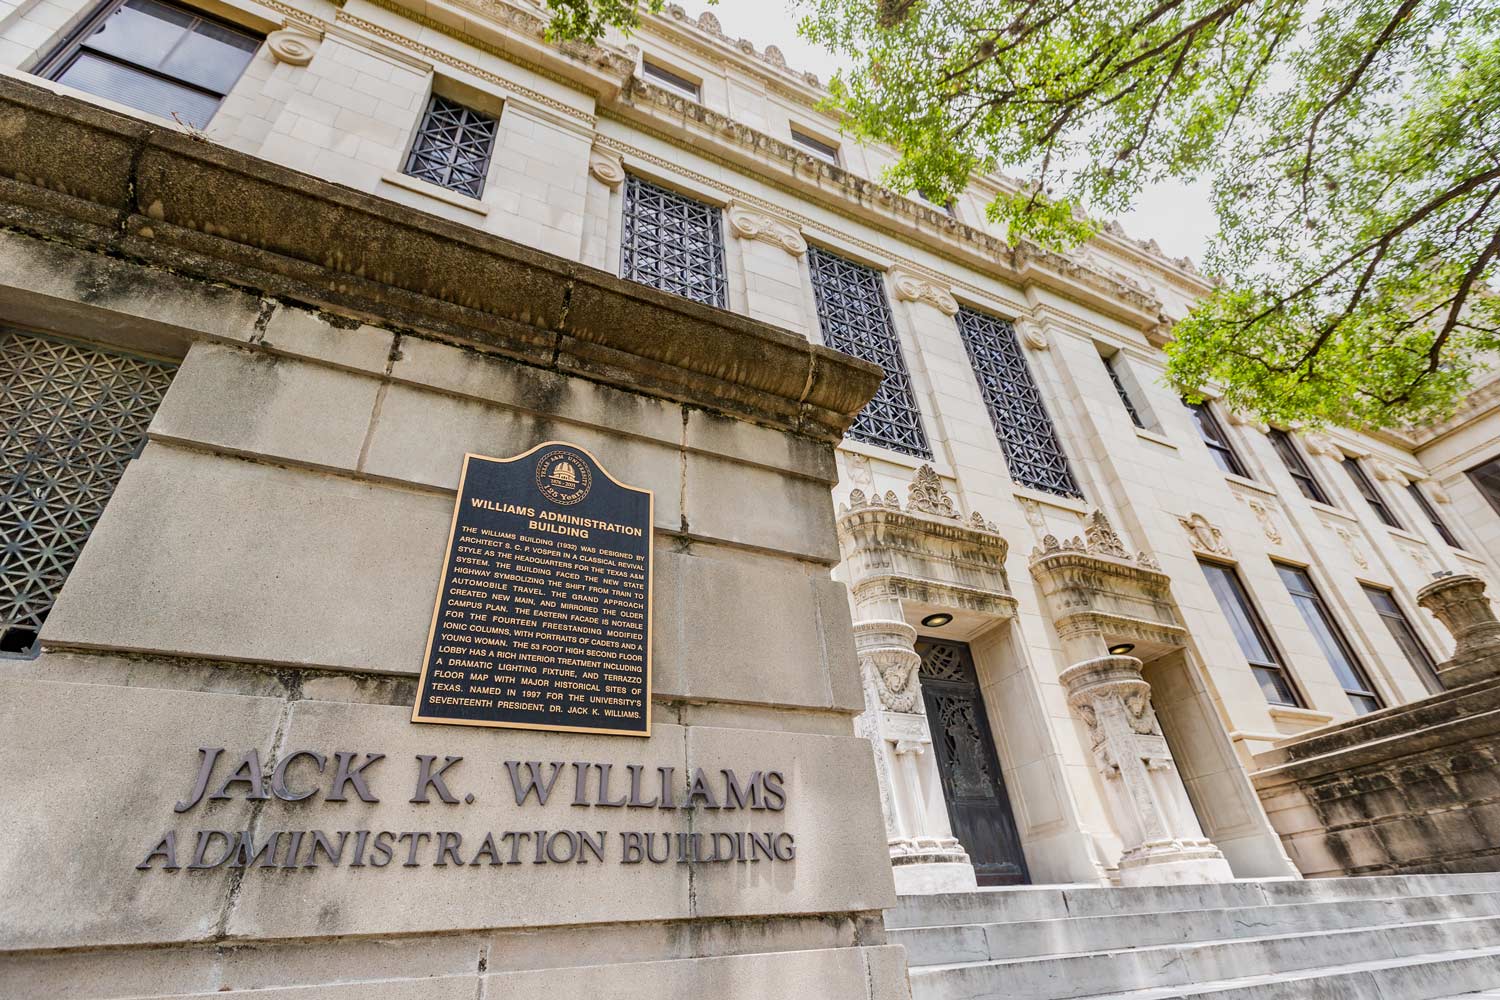 Looking up at the Jack K Williams Administration building historical marker